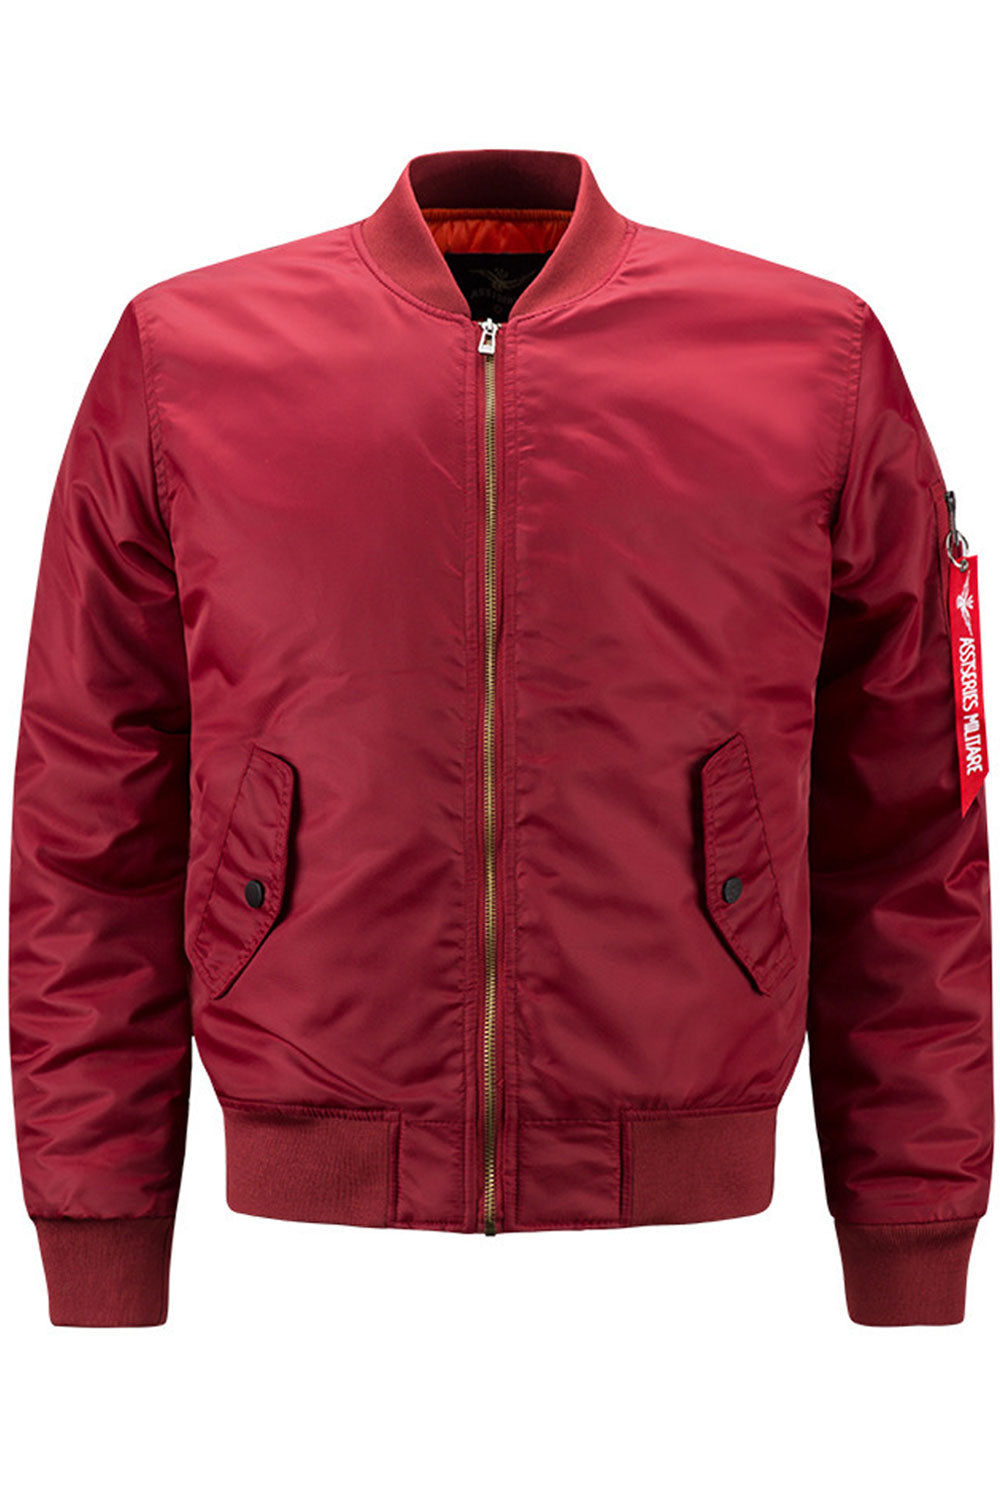 Men Fashion Solid Colored Winter Padded Jacket - MJC15055